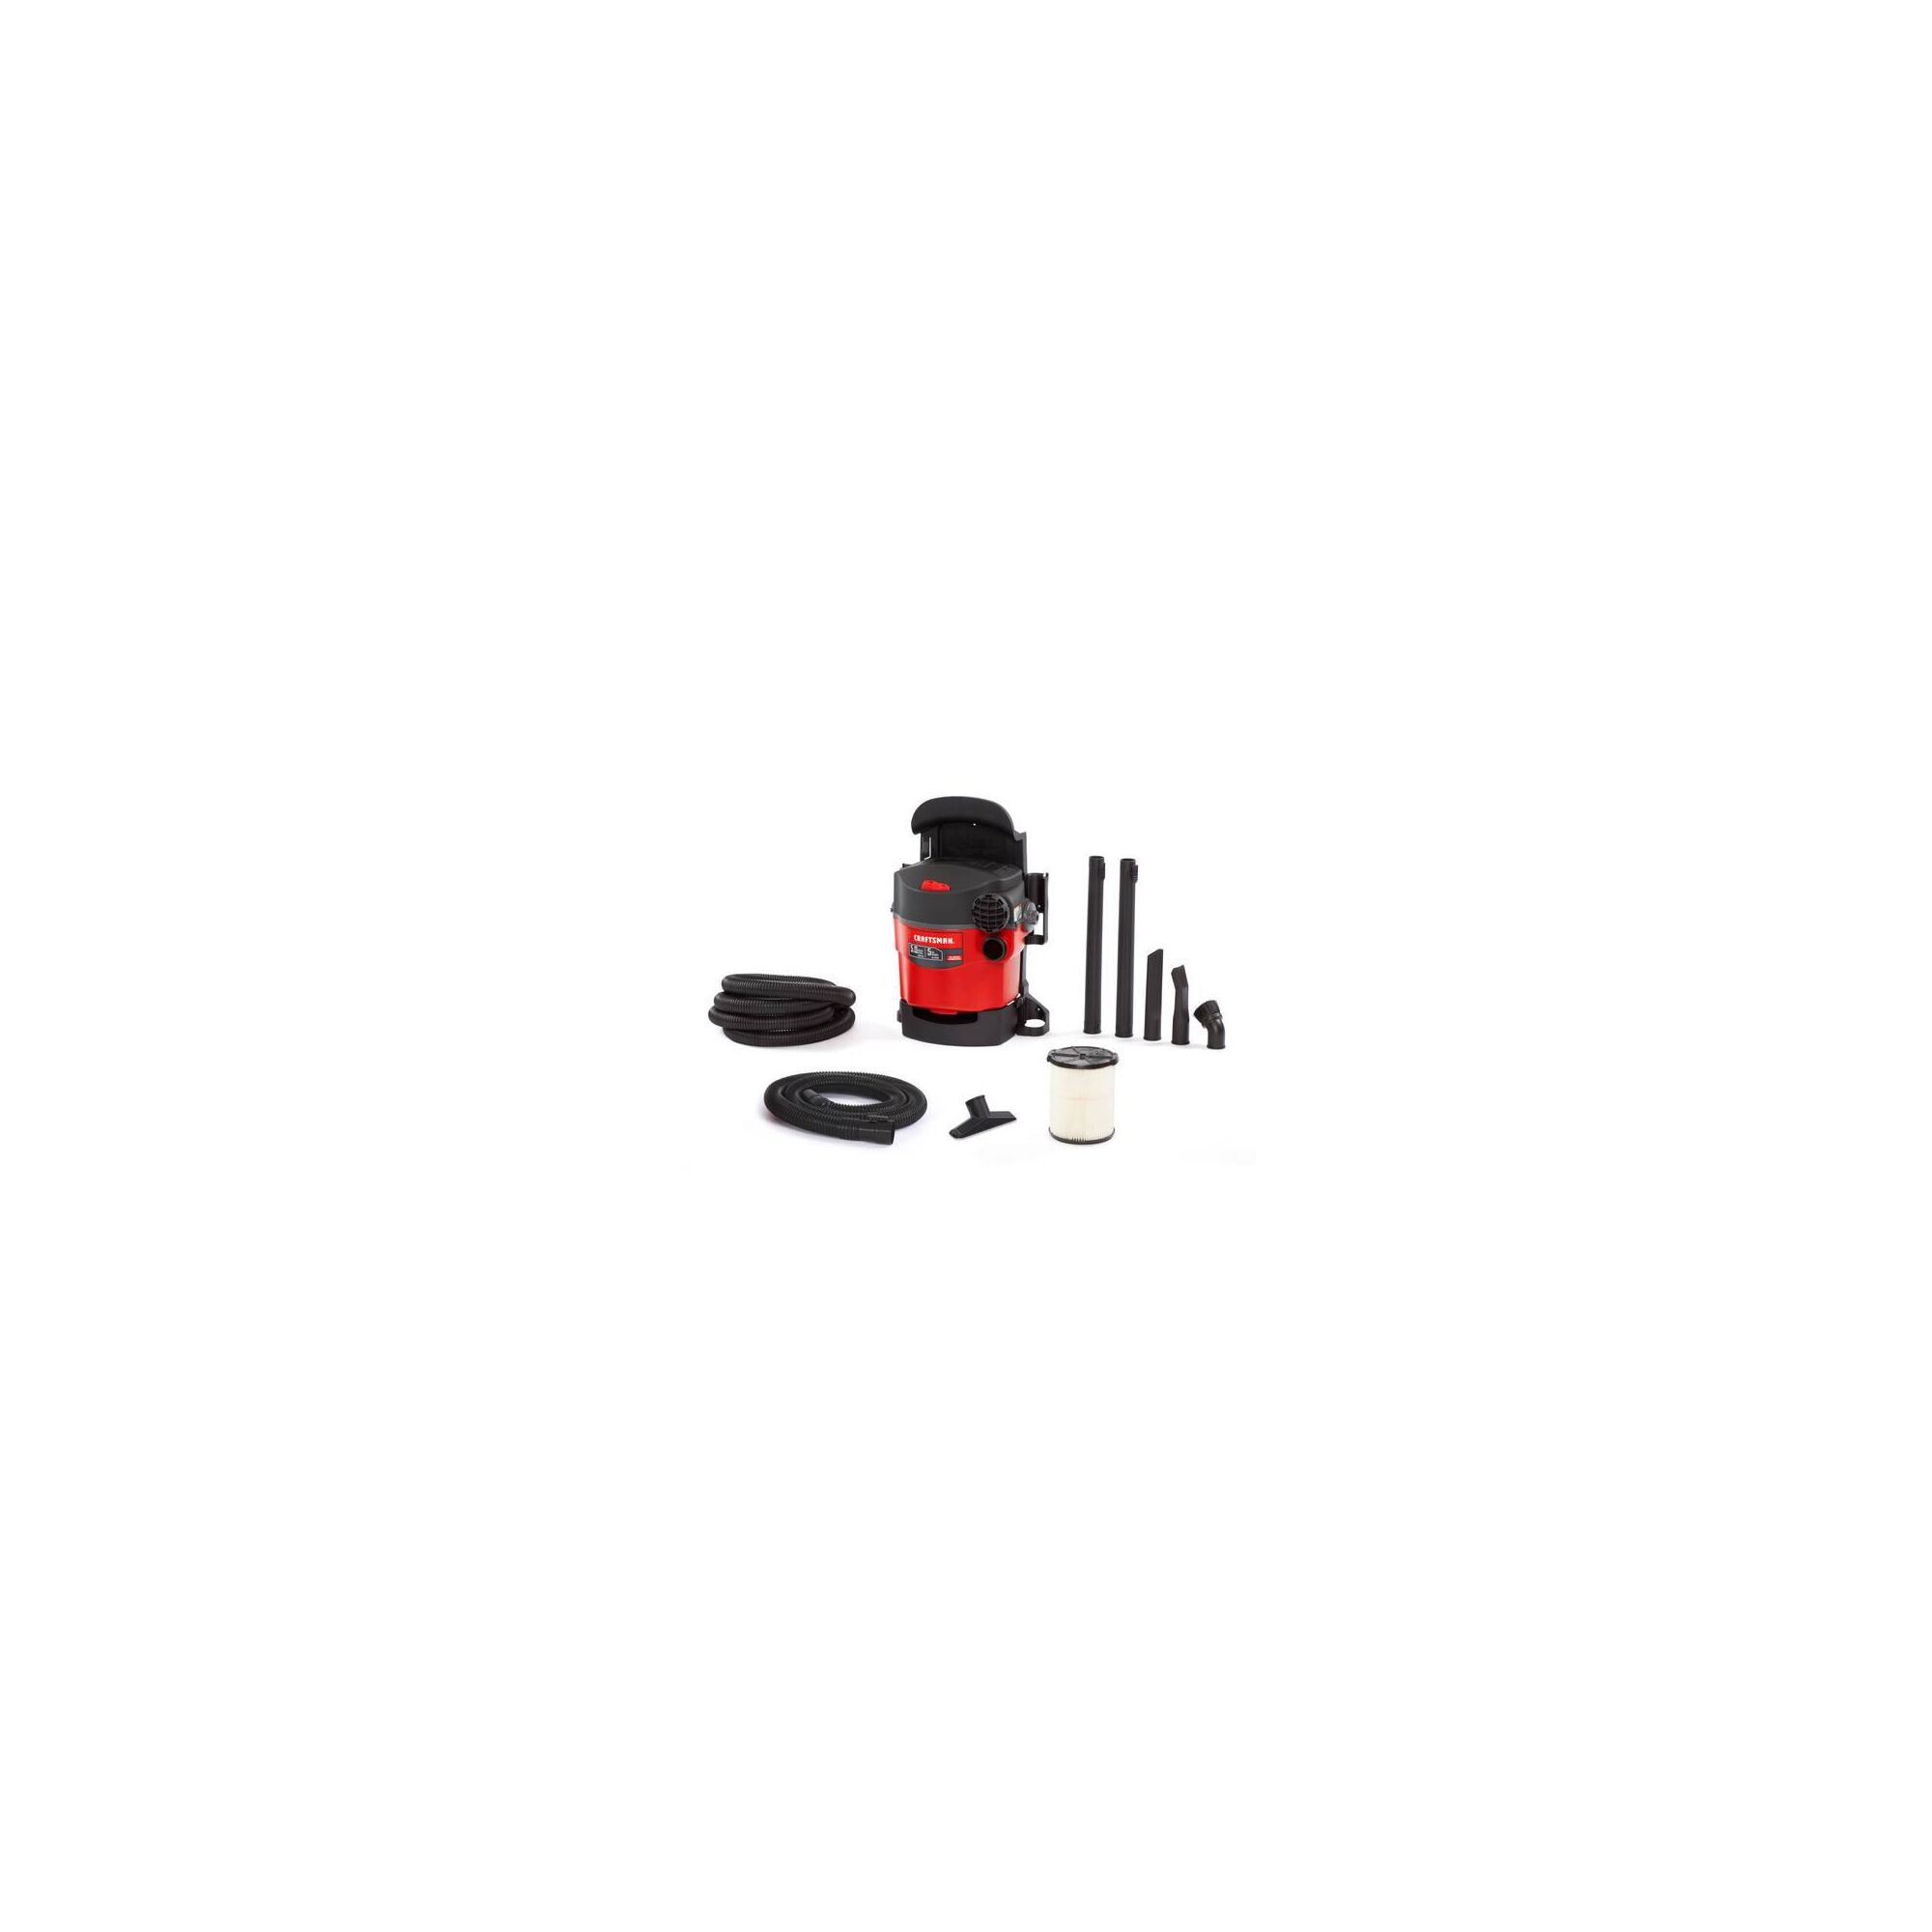 View of CRAFTSMAN Vacuums: Wet/Dry Shop Vac and additional tools in the kit